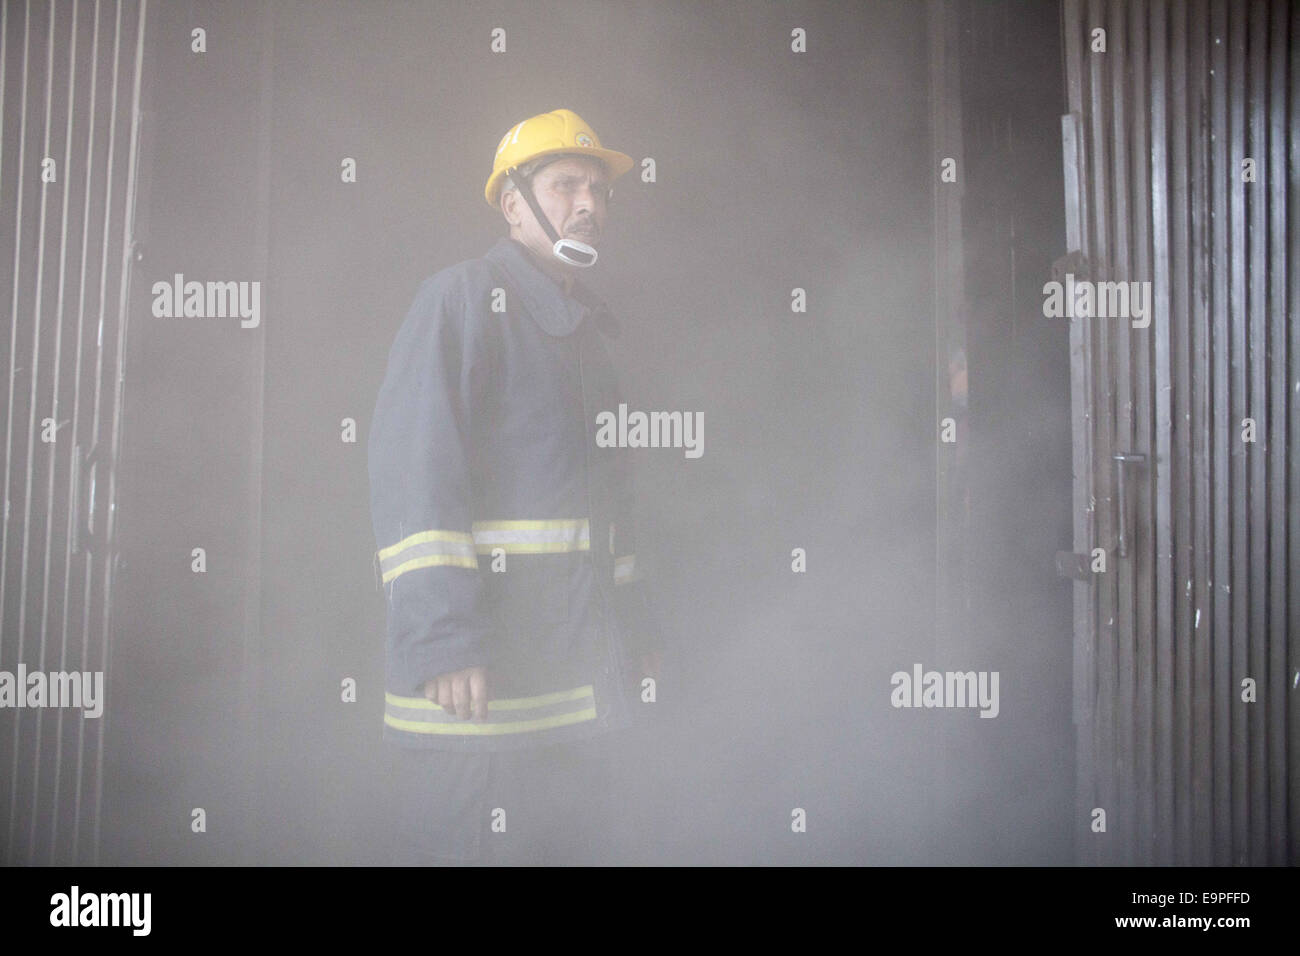 Dhaka, Bangladesh. 31st Oct, 2014. A fire man preparing himself to enter inside the fired building.A devastating fire has broken out in the office of Bangla national daily Amar Desh housed at Bangladesh Steel and Engineering Corporation (BSEC) building in the capital's Kawran Bazar.Fire service sources said a total of 20 fire fighting units rushed to the scene, and are trying to bring the blaze under control.Earlier on Feb 26, 2007, offices of 10 institutions including media units the NTV, RTV and Amar Desh were destroyed in a fire incident at the same building. (Credit Image: © Zakir Hoss Stock Photo